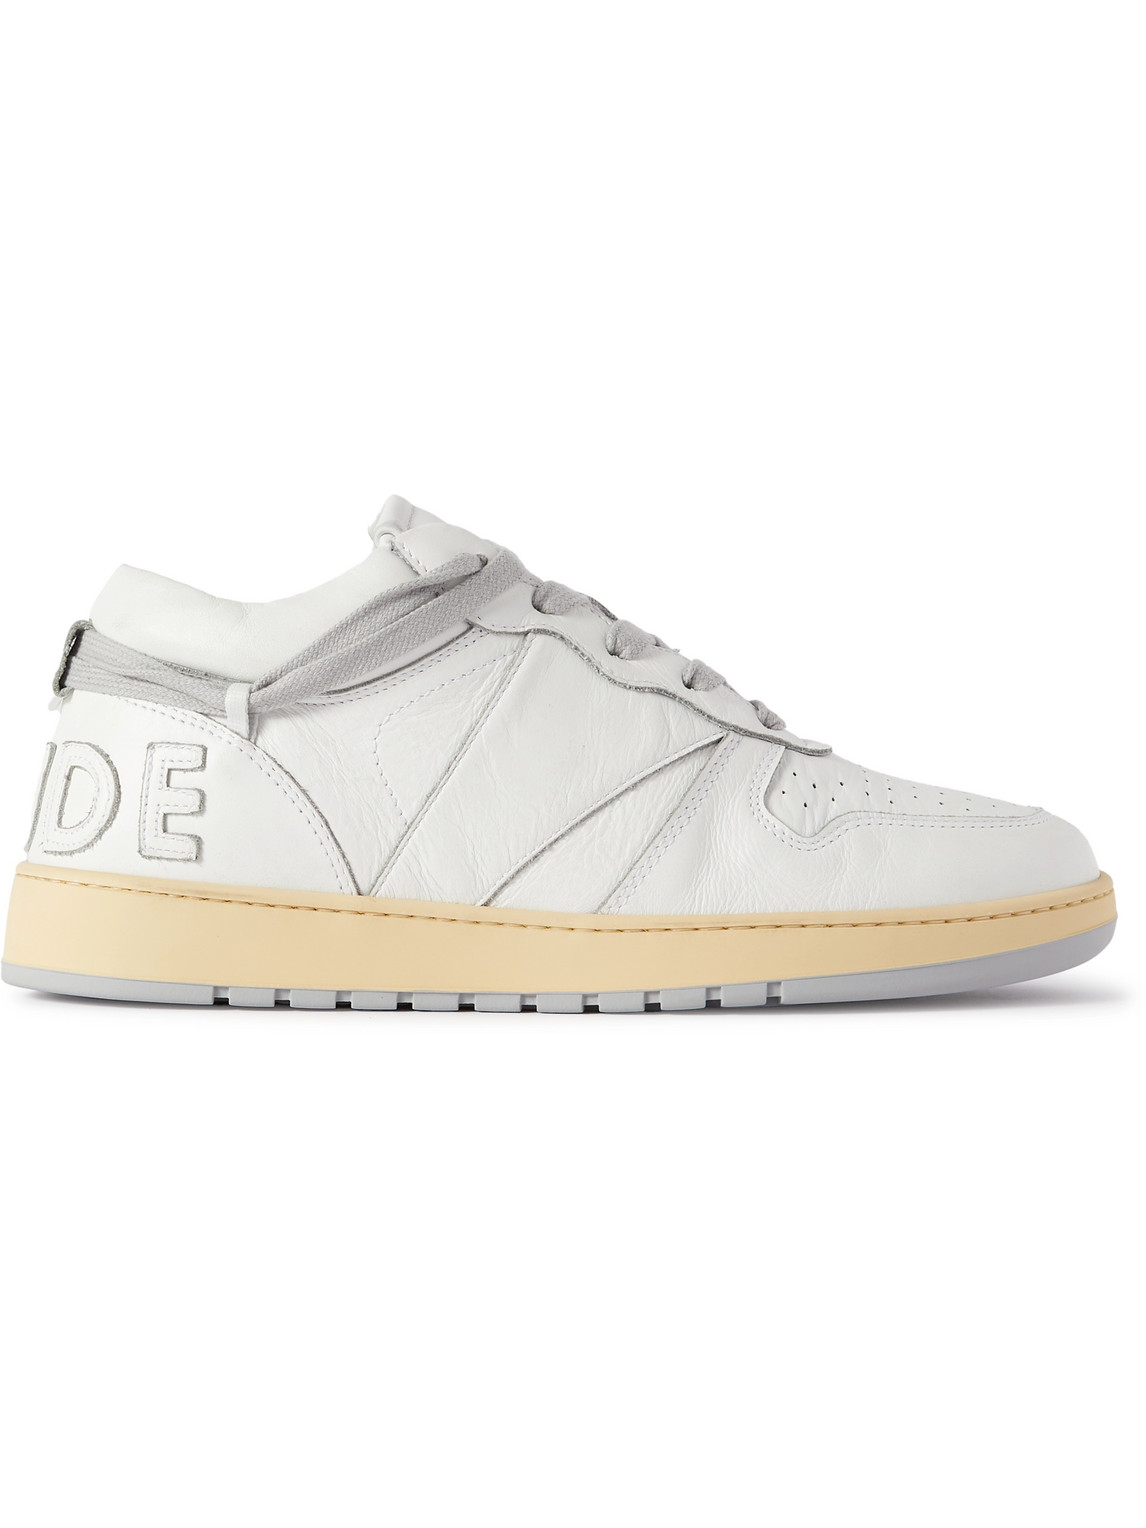 Rhude - Rhecess Distressed Leather Sneakers - Men - White - US 10 von Rhude